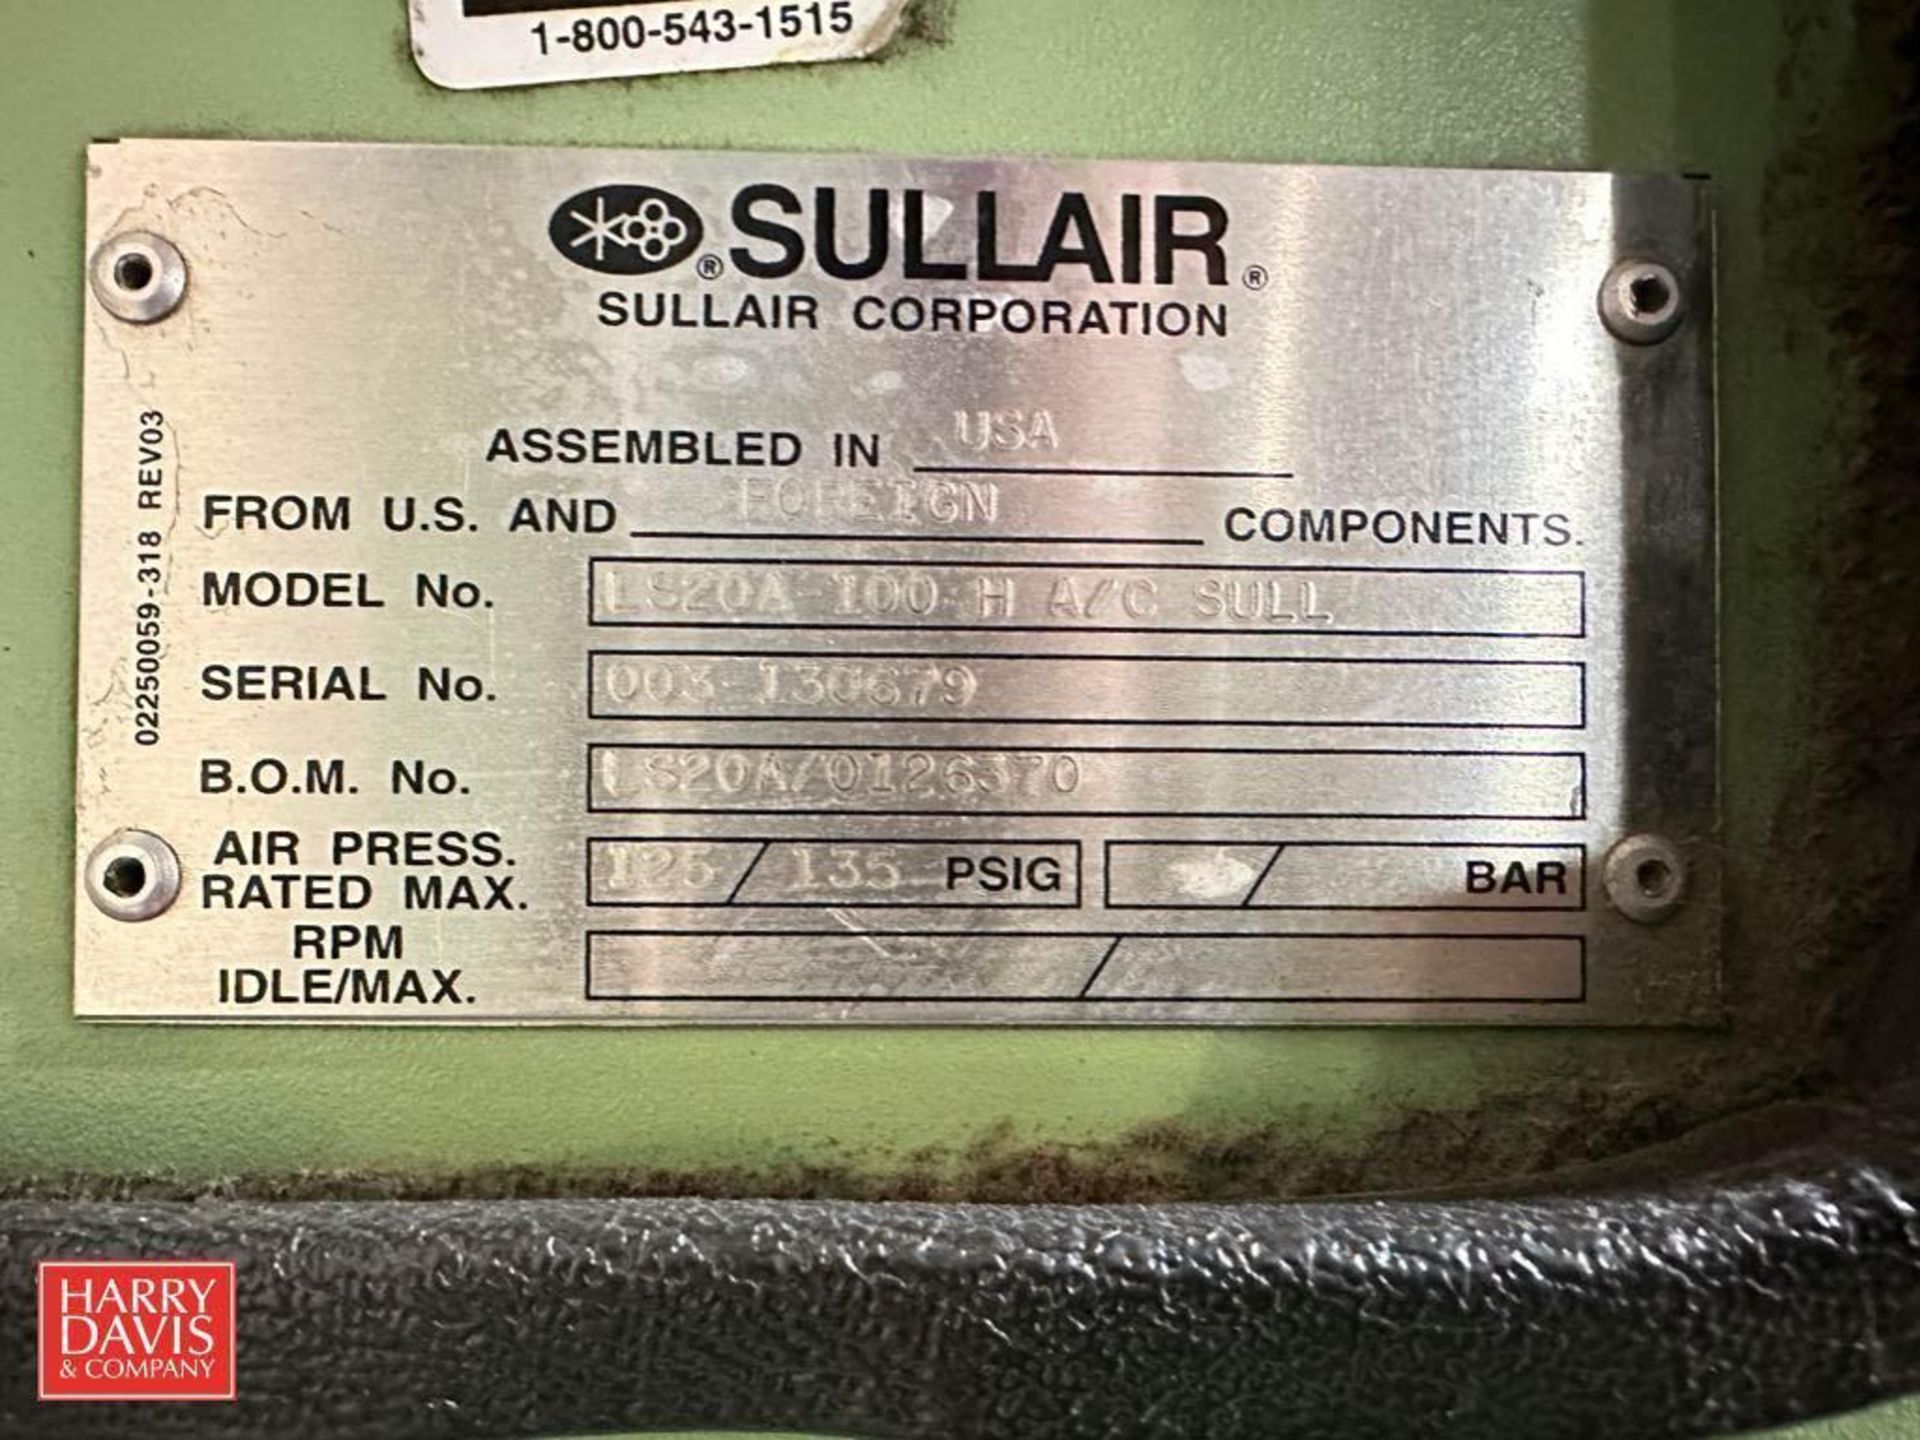 Sullair Air Compressor, Model: L32OA-100 H A/C SULL, S/N: 003-130679, 135 PSIG with Square D Heavy - Image 2 of 2